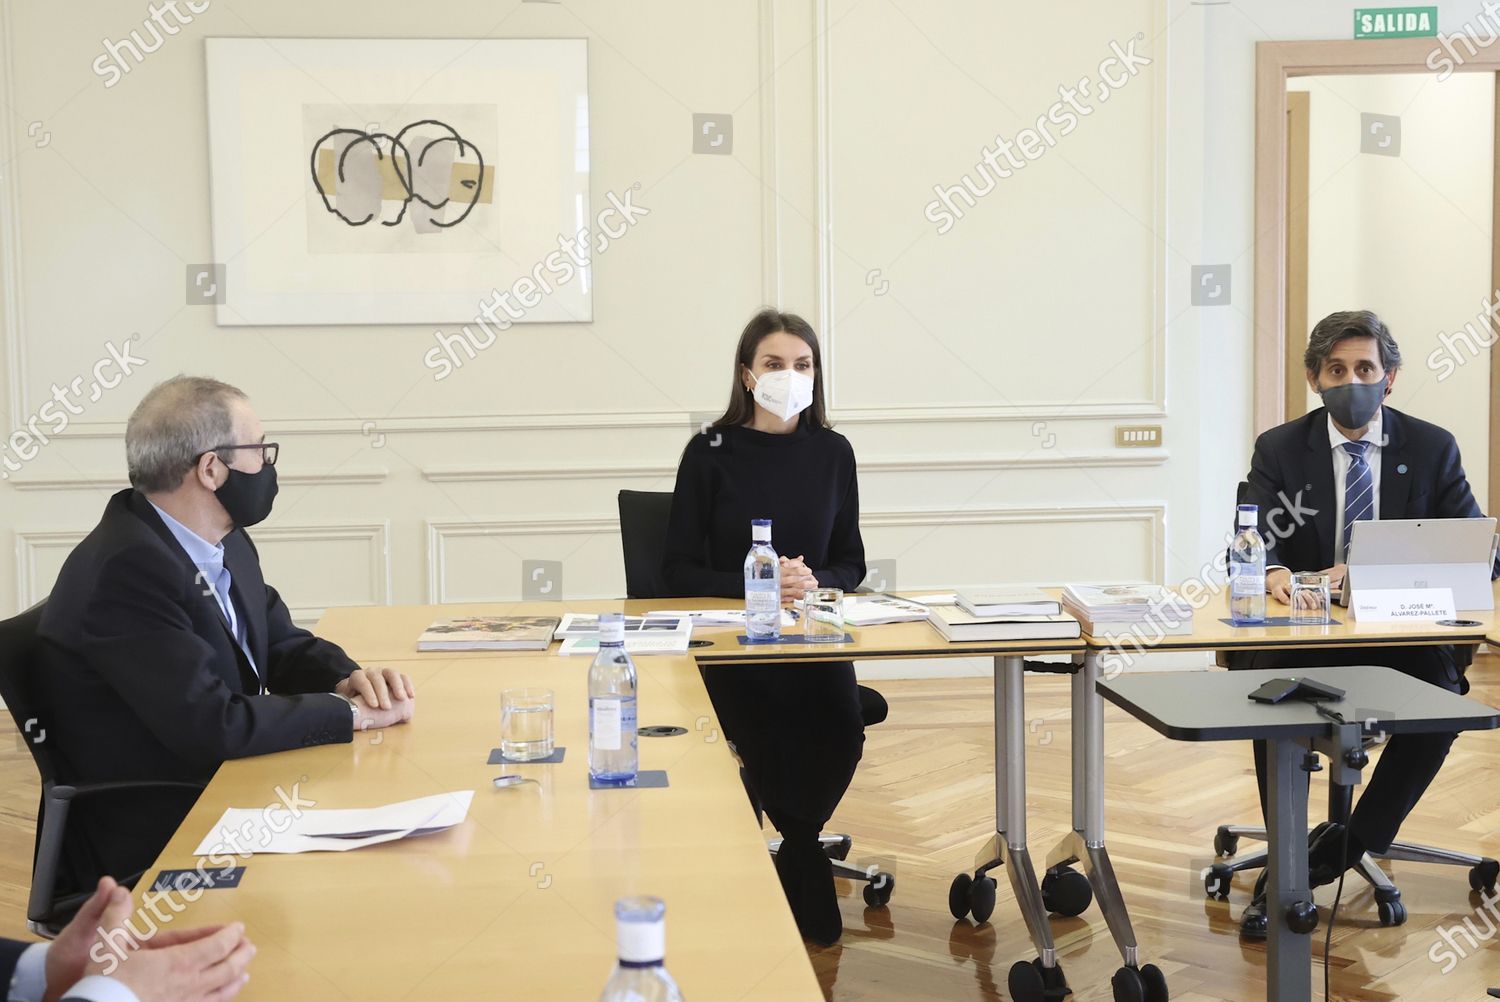 queen-letizia-attends-a-working-meeting-with-the-fundaci-n-telefonica-management-committee-madrid-spain-shutterstock-editorial-11720295h.jpg